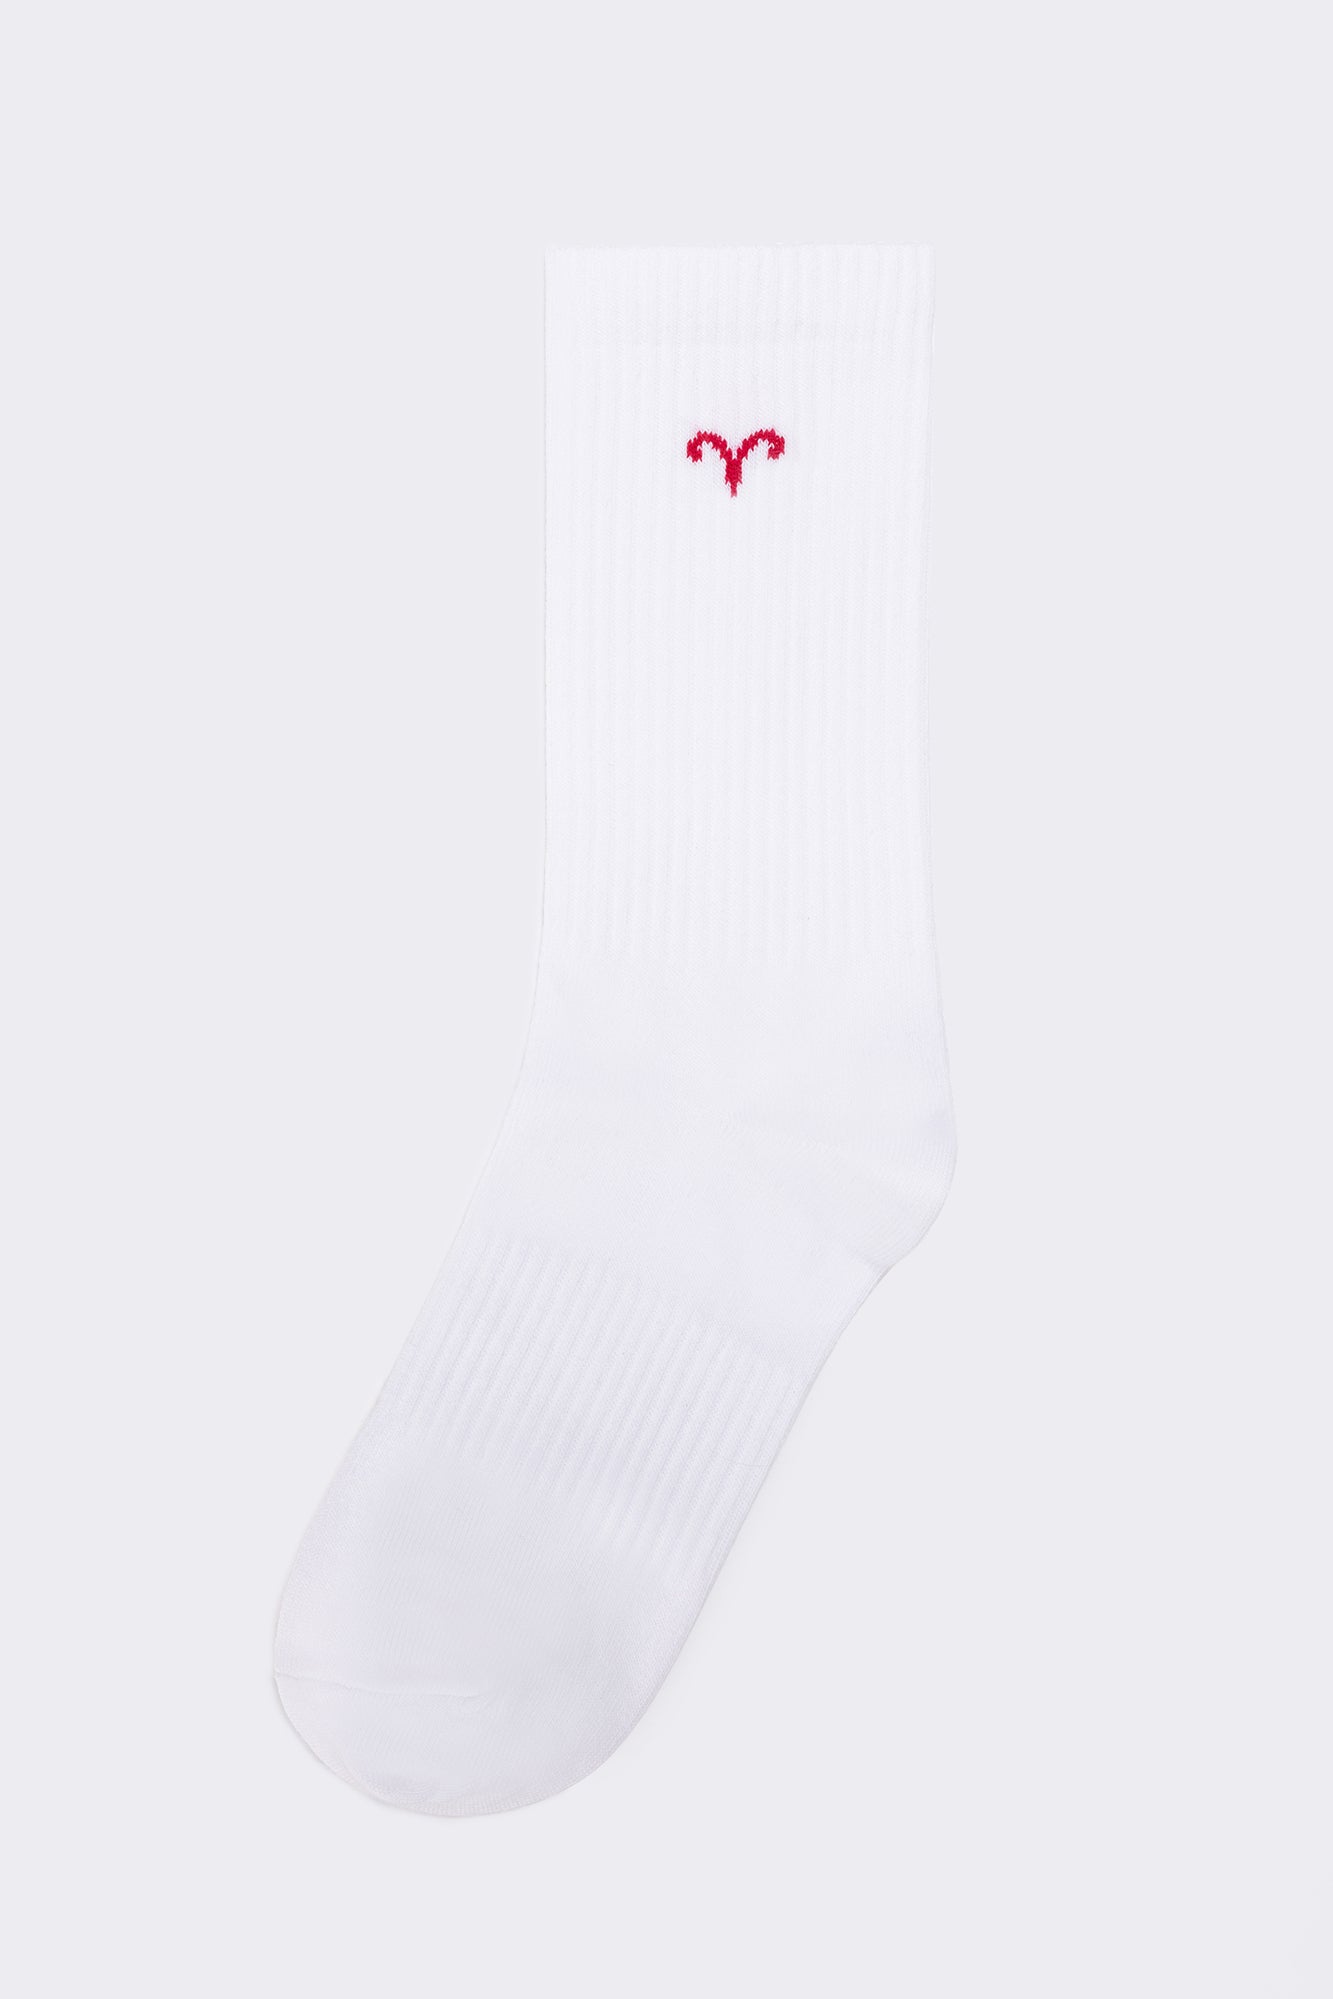 A wholesale clothing model wears Embroidered Socks - White & Plum Color, Turkish wholesale Socks of Touche Prive